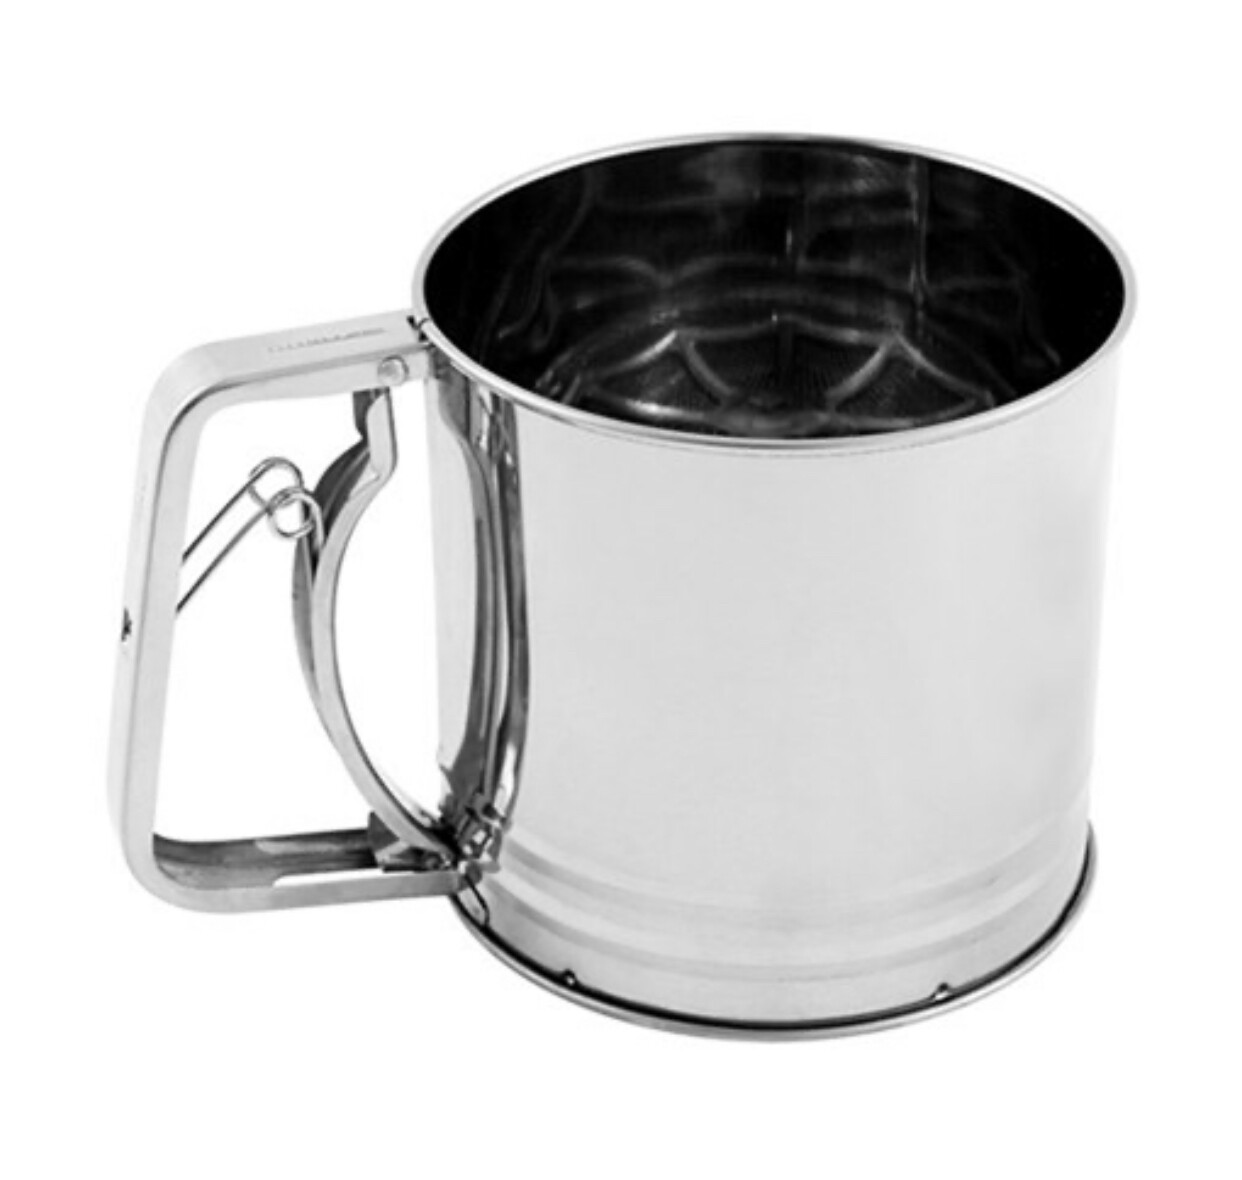 CUISENA  - Flour Sifter Stainless Steel
5 - cup capacity